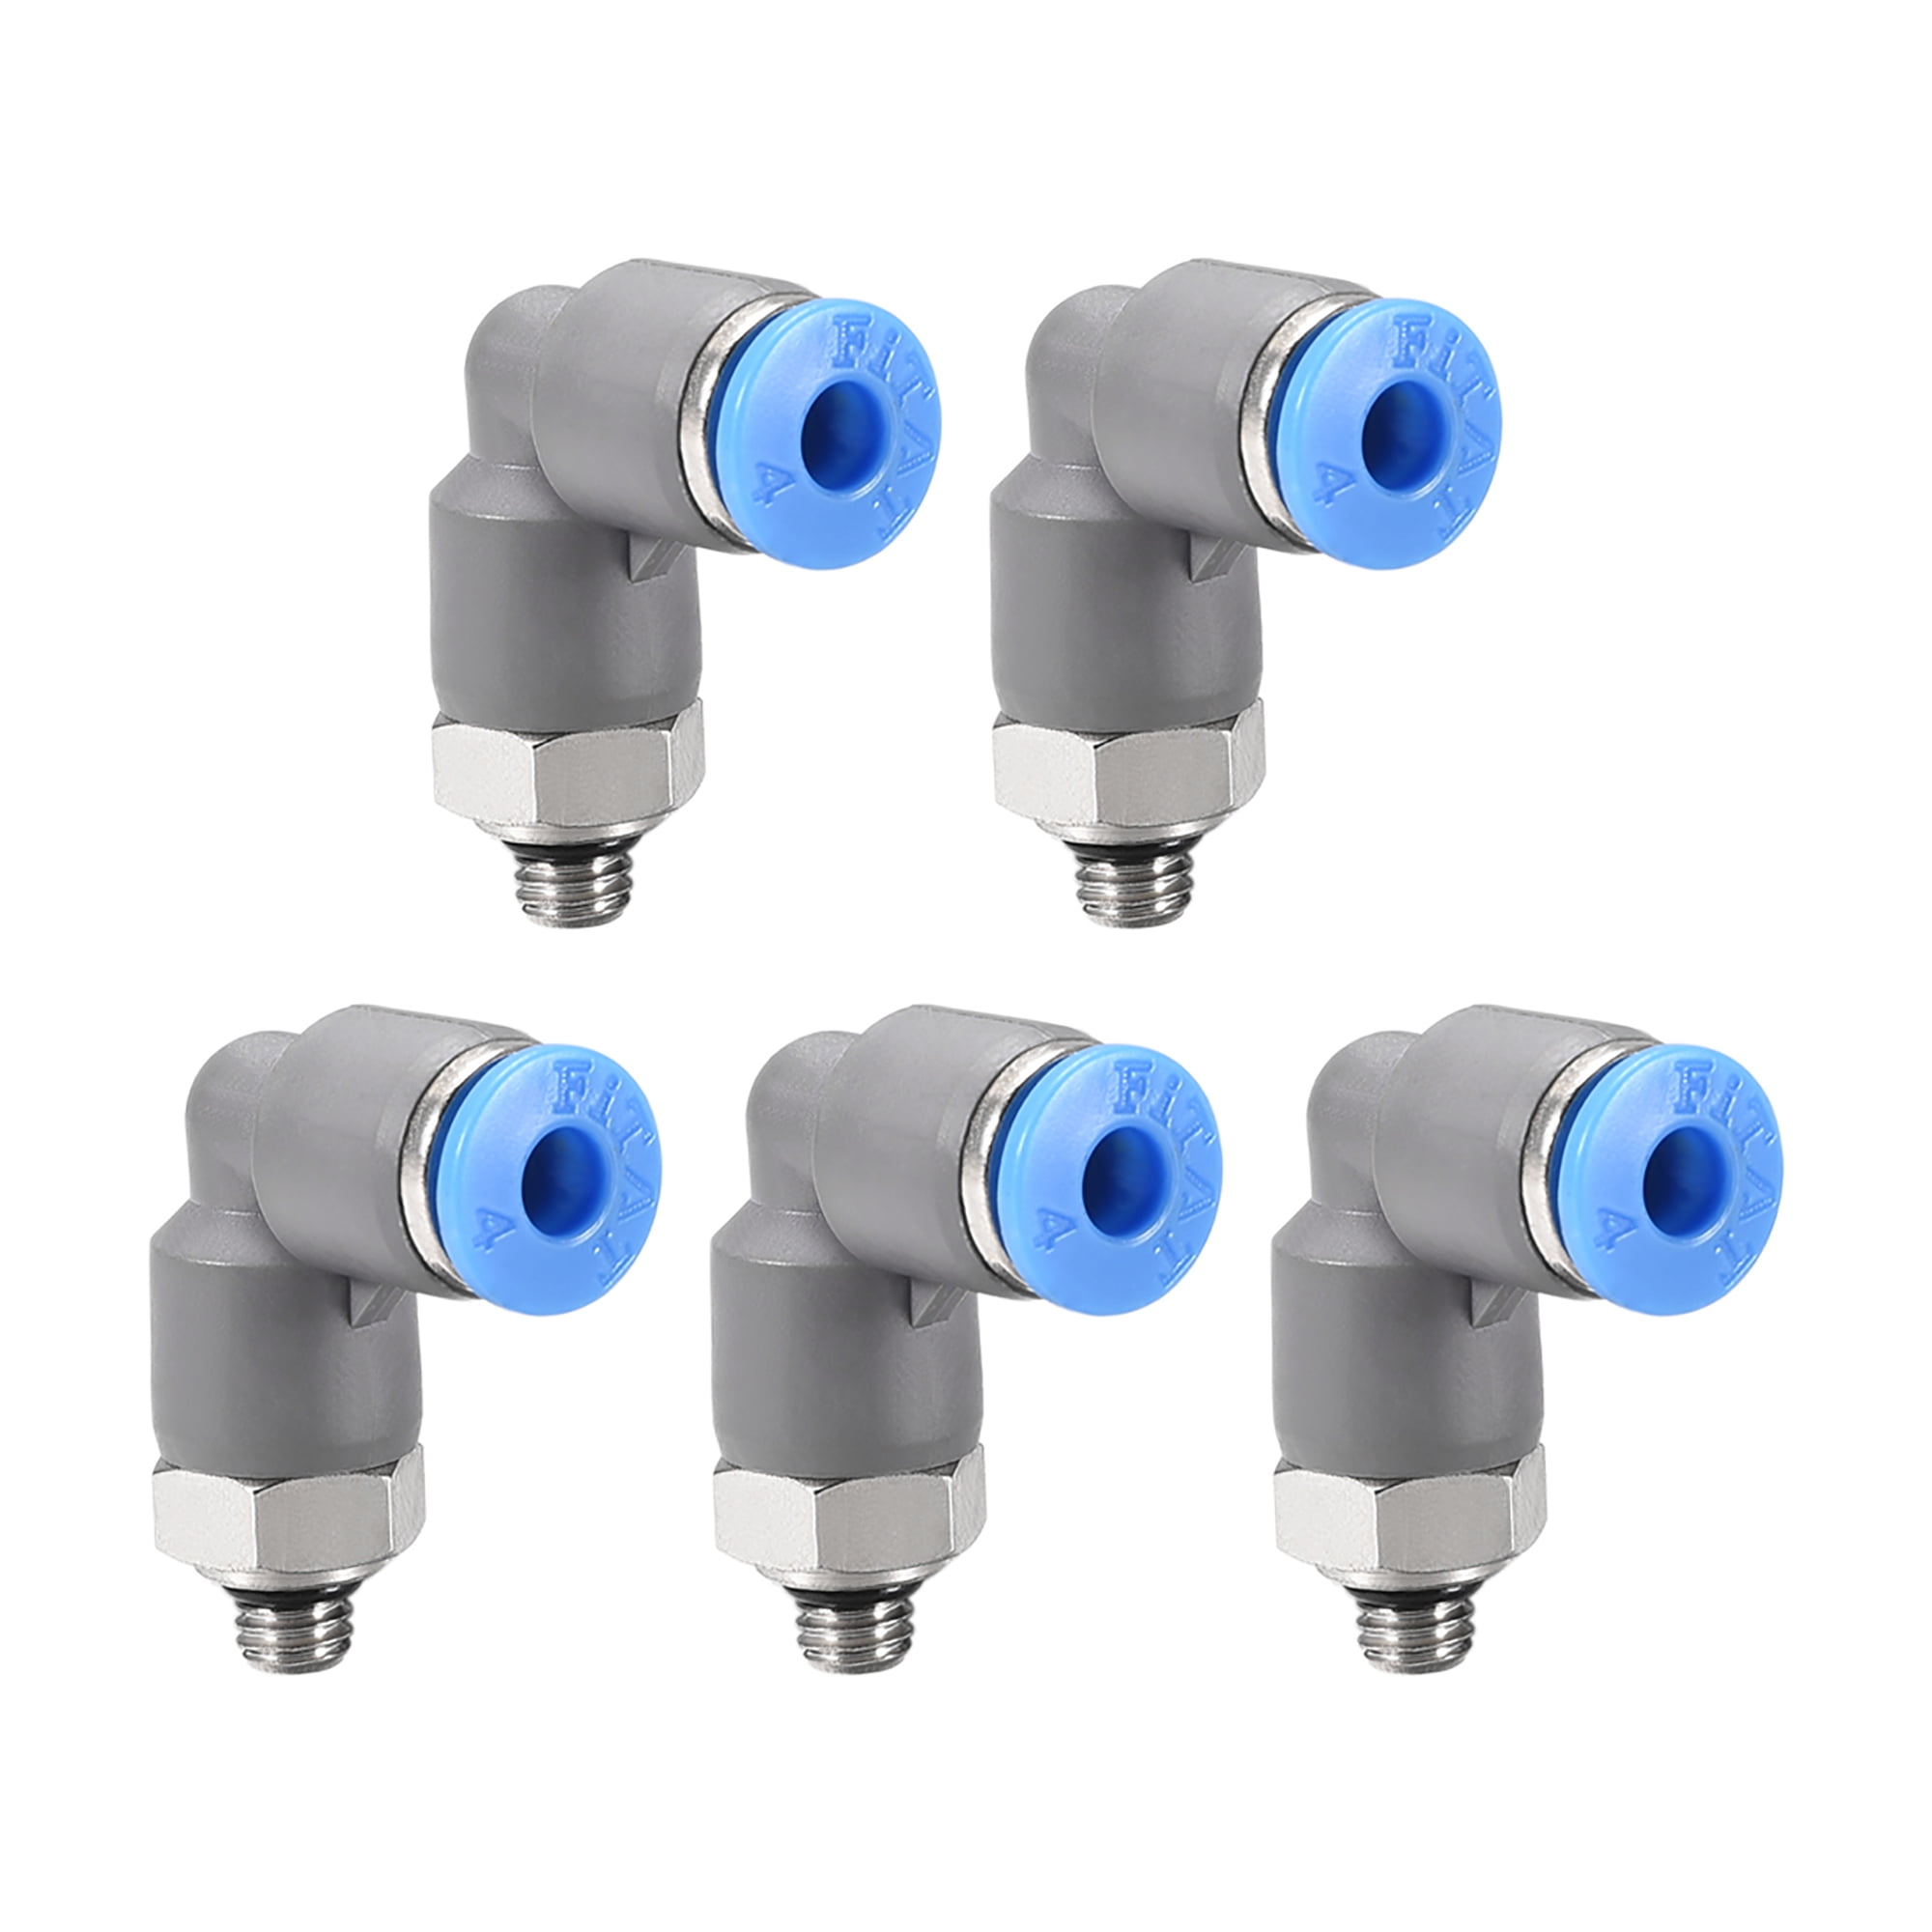 4mm Pneumatic 90 Degree Elbow Connector Hose Tube Push in Fitting for Air 5pcs 